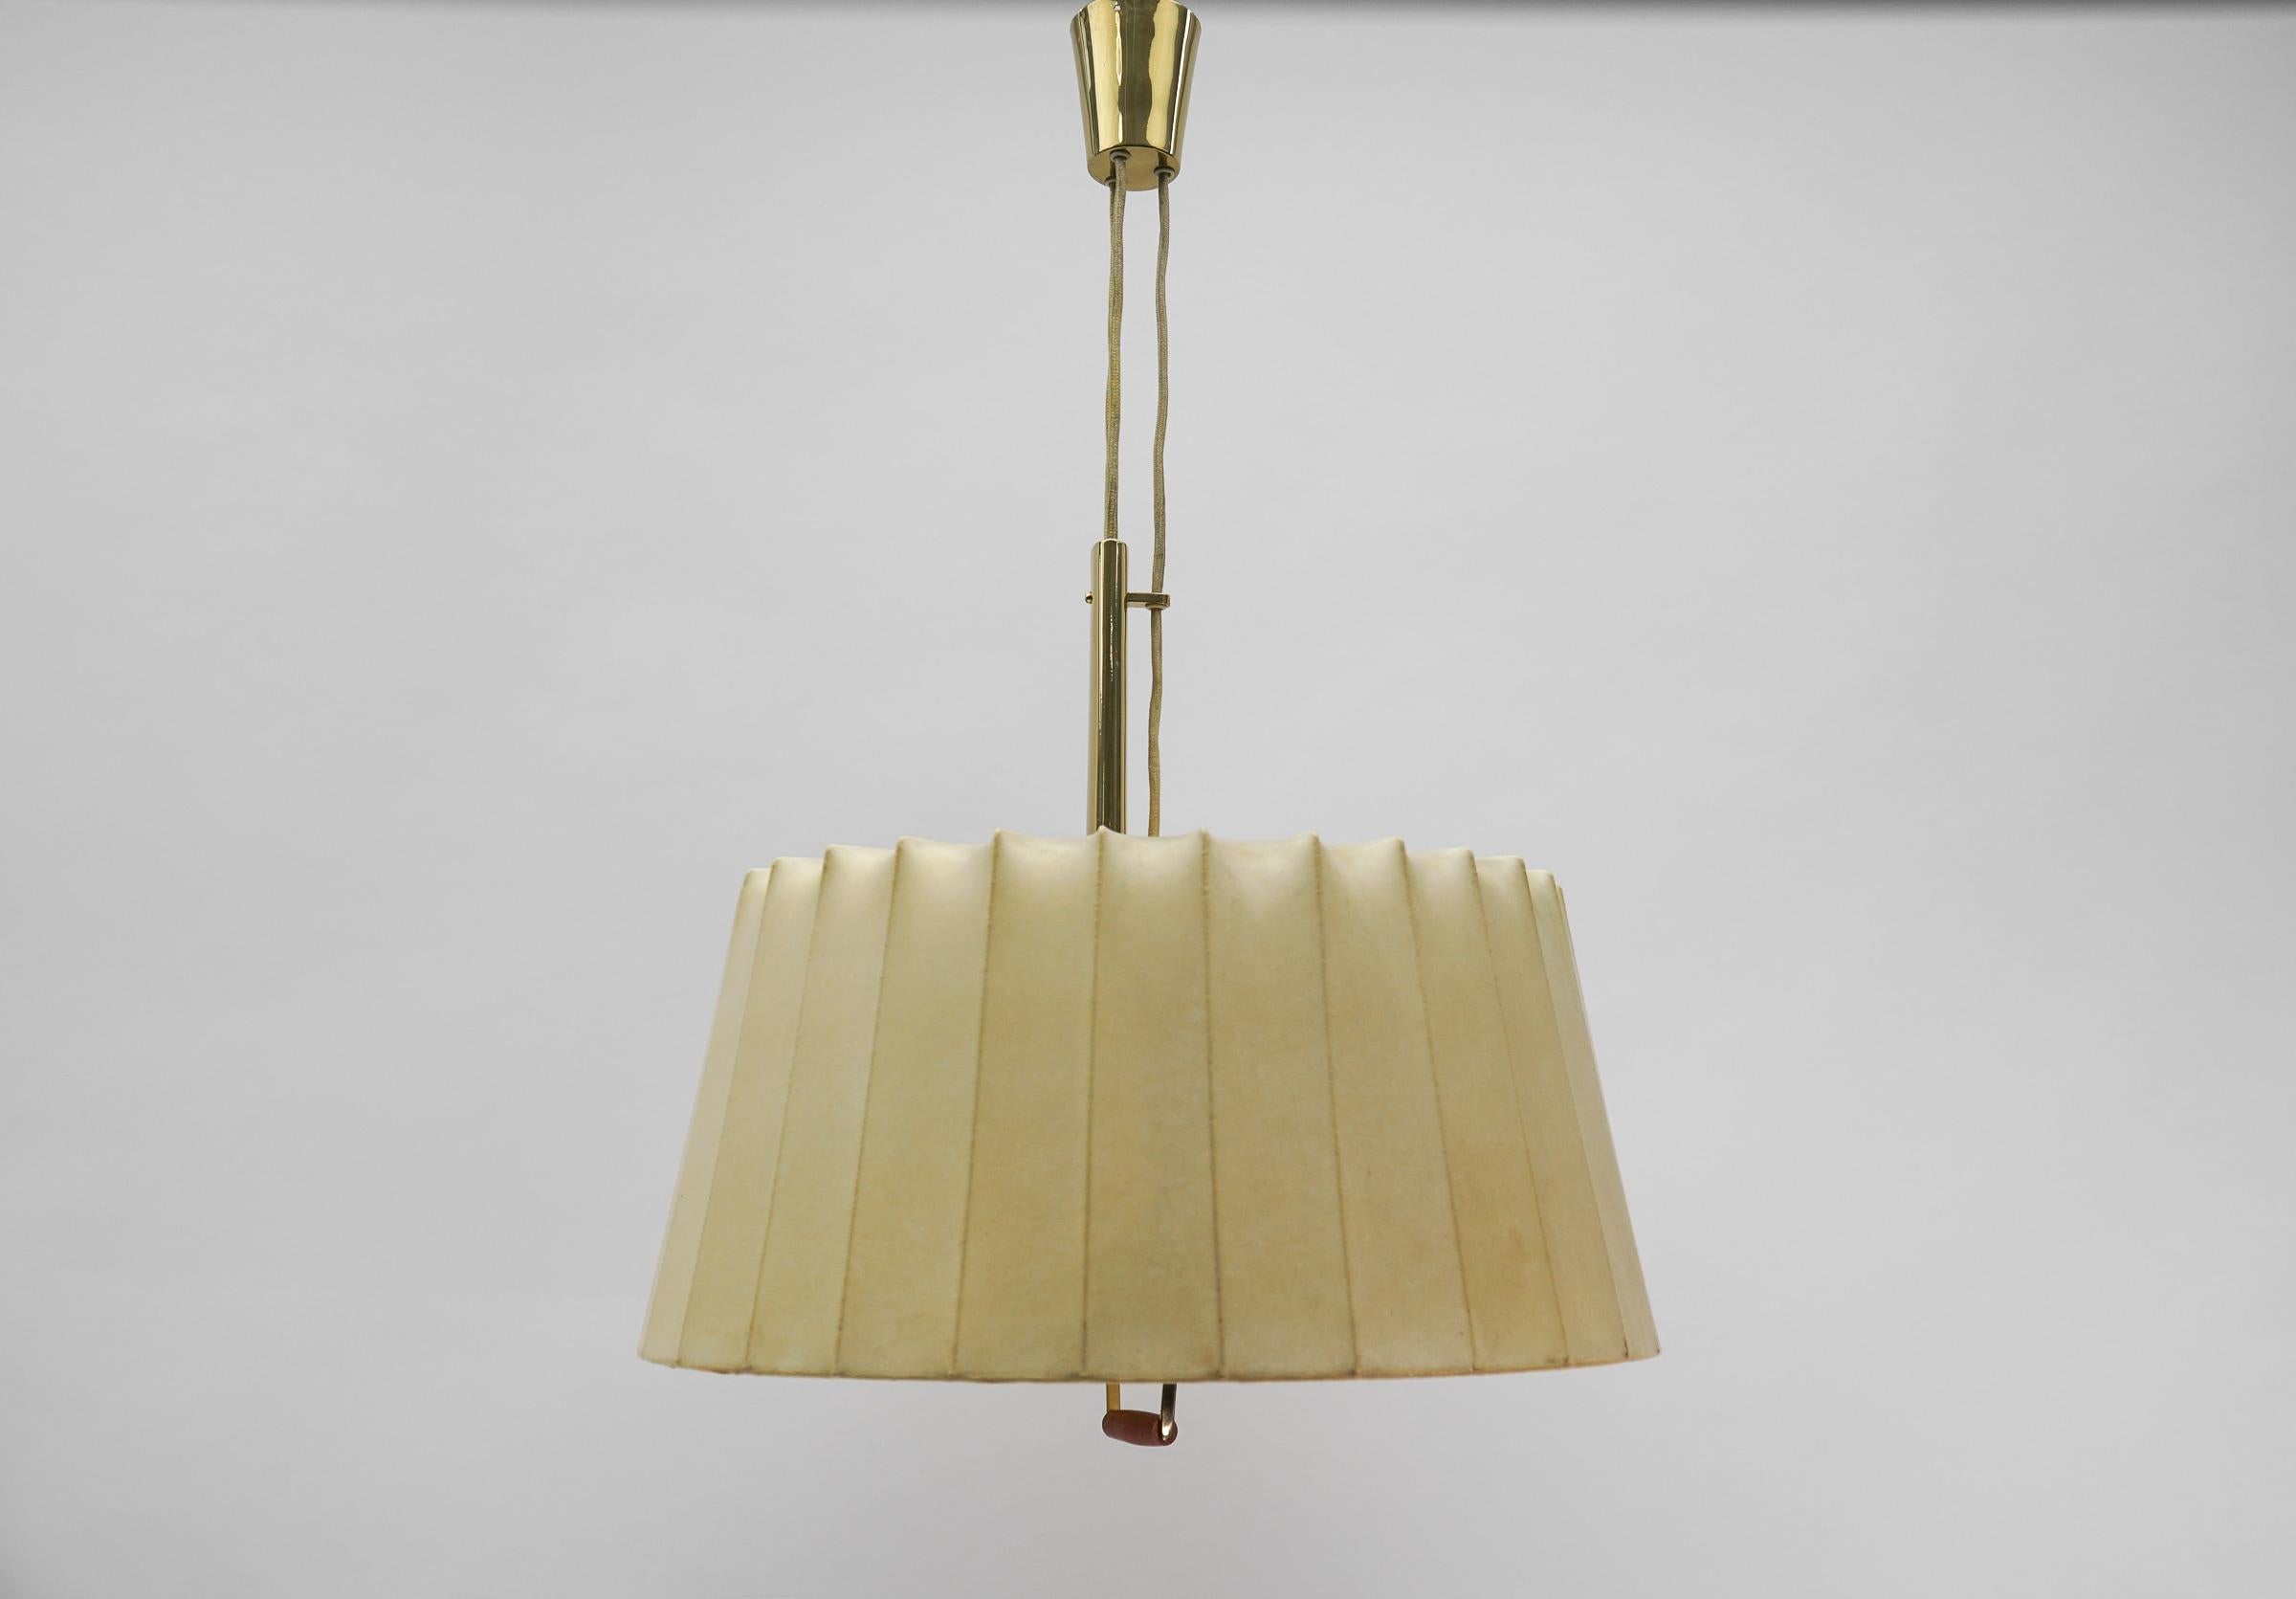 Lovely Cocoon Counterweight Hanging Lamp by Münchener Werkstätten, 1950s Germany For Sale 4